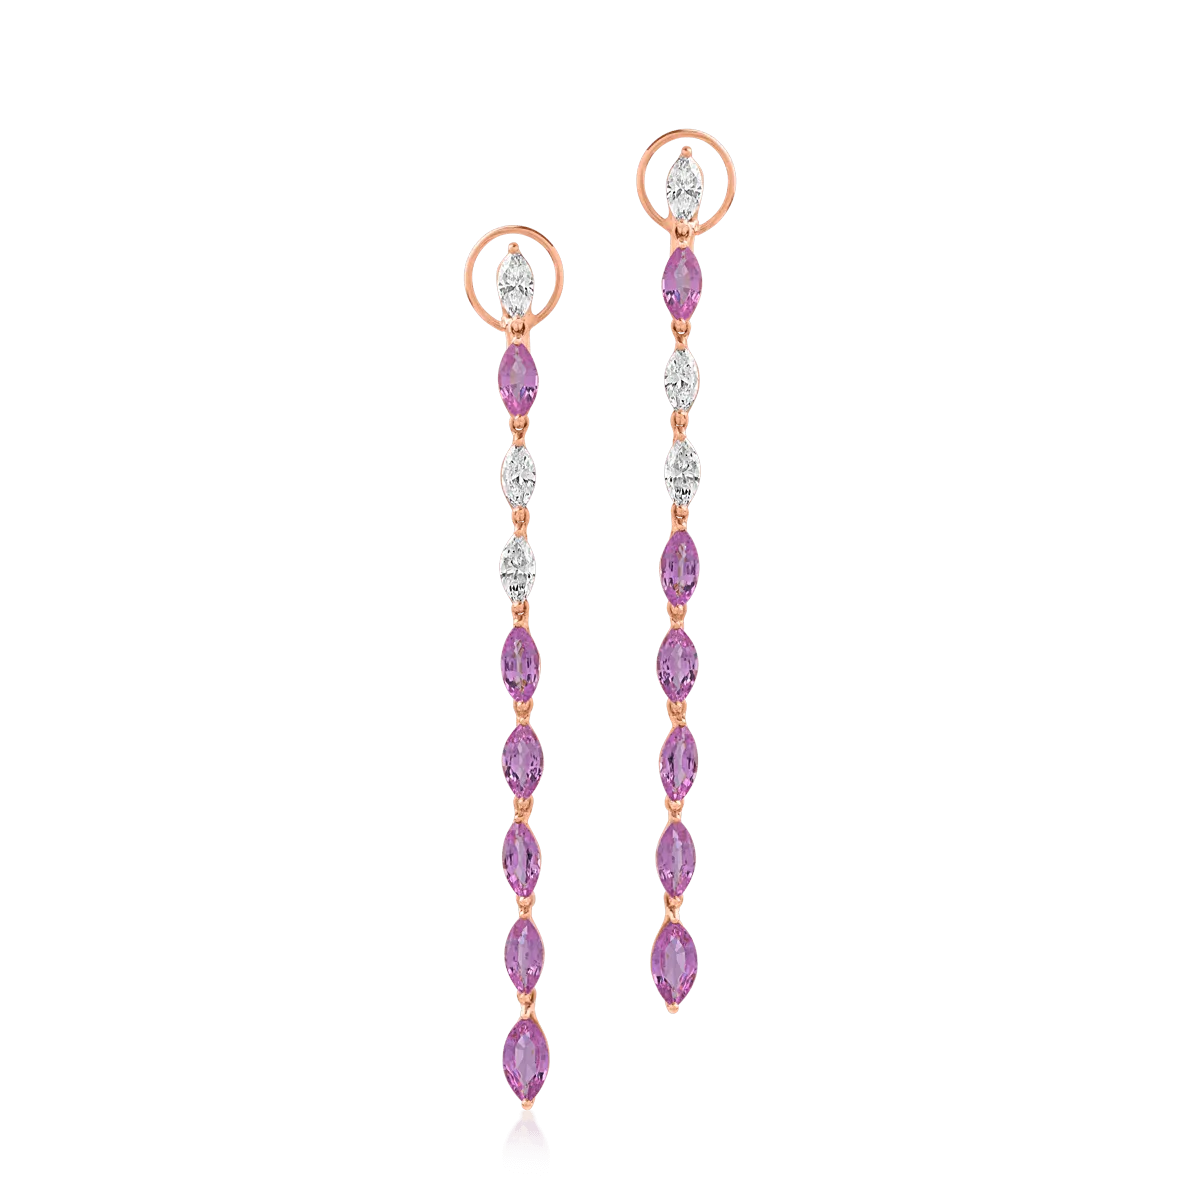 18K rose gold earrings with pink sapphires of 7.34ct and diamonds of 1.78ct